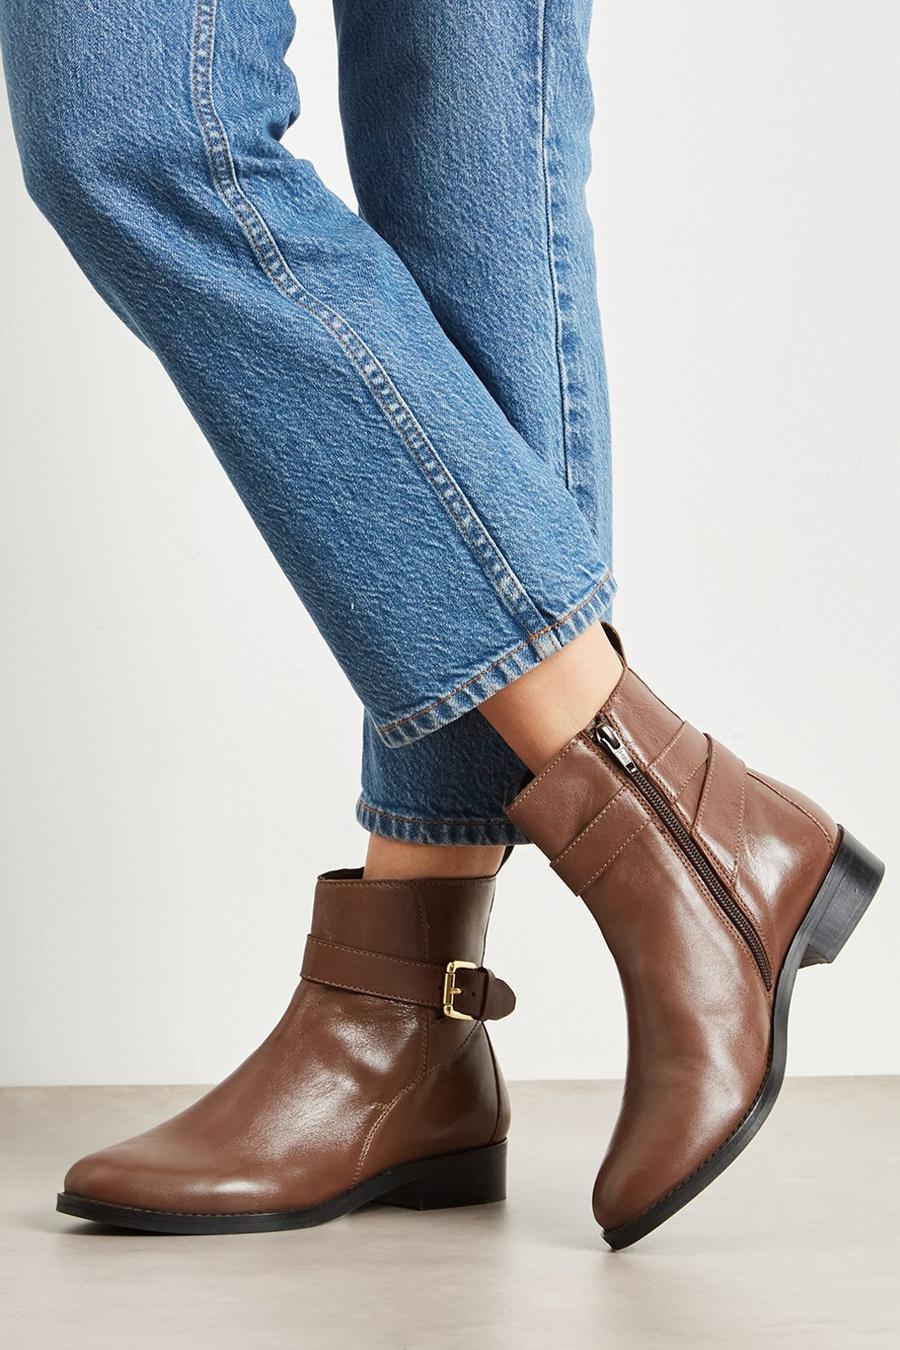 Principles: October Leather Buckle Ankle Boots